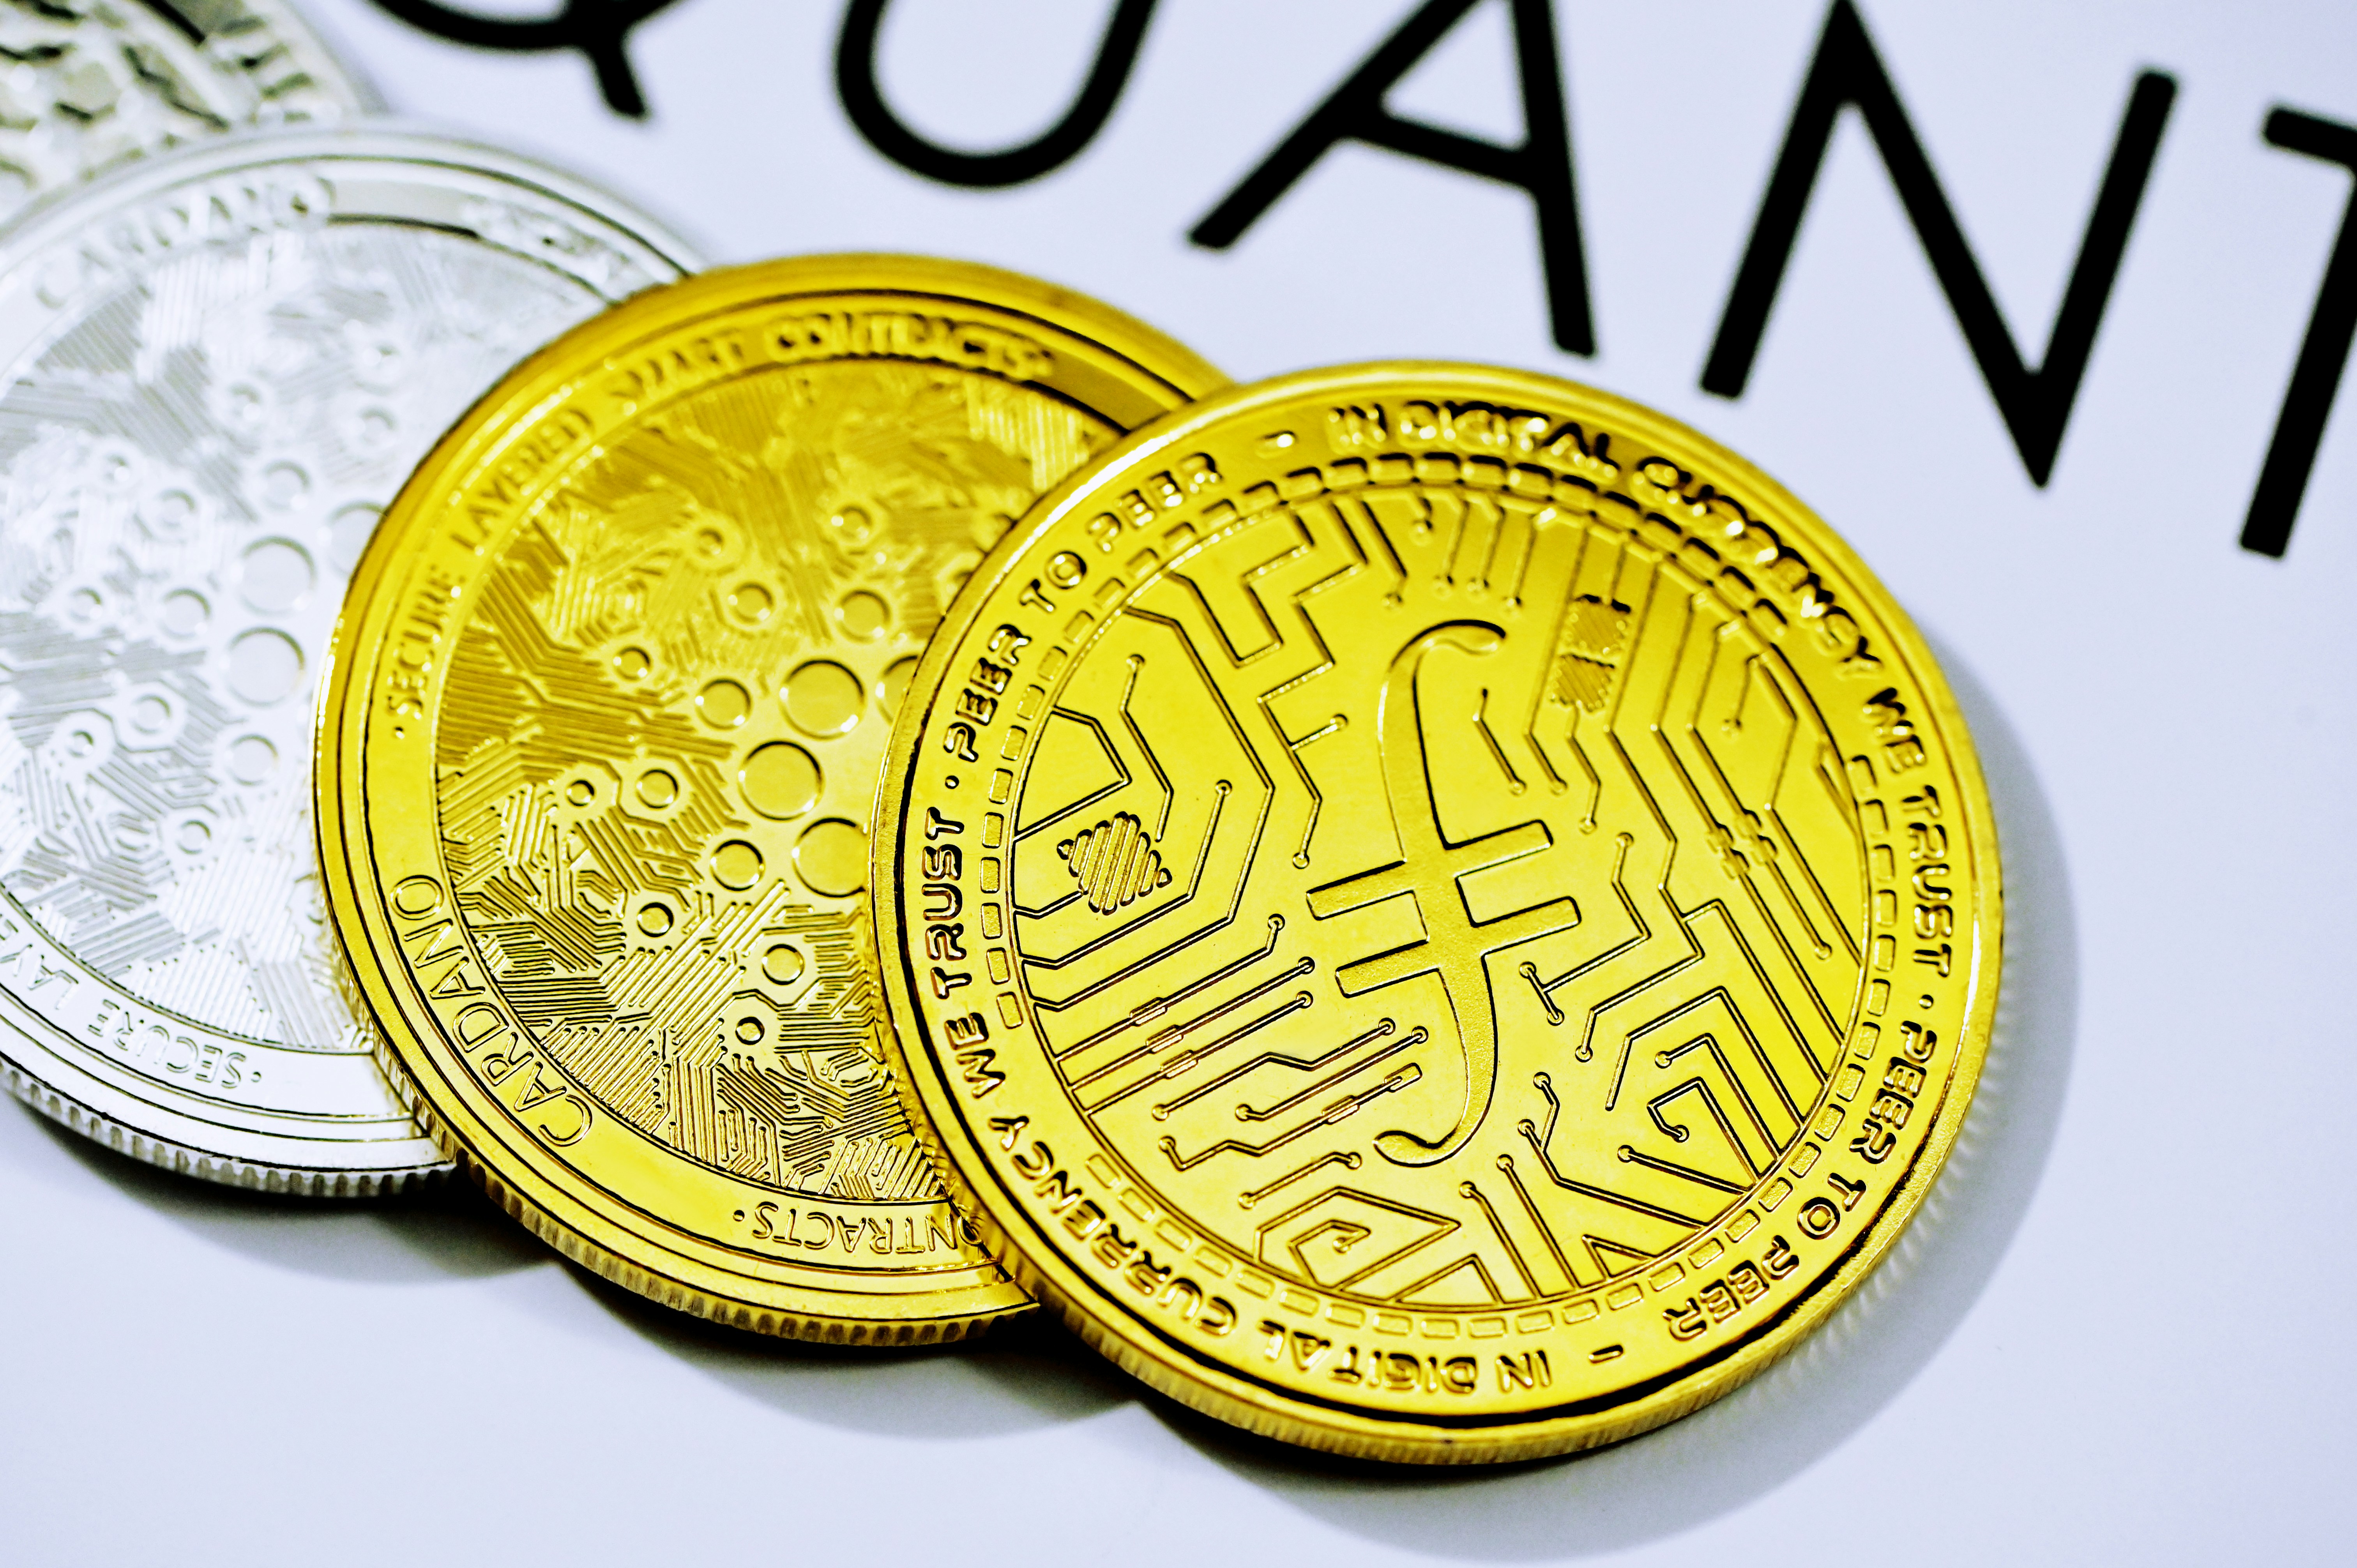 A Filecoin and Two ADA coins on the Quantitatives background